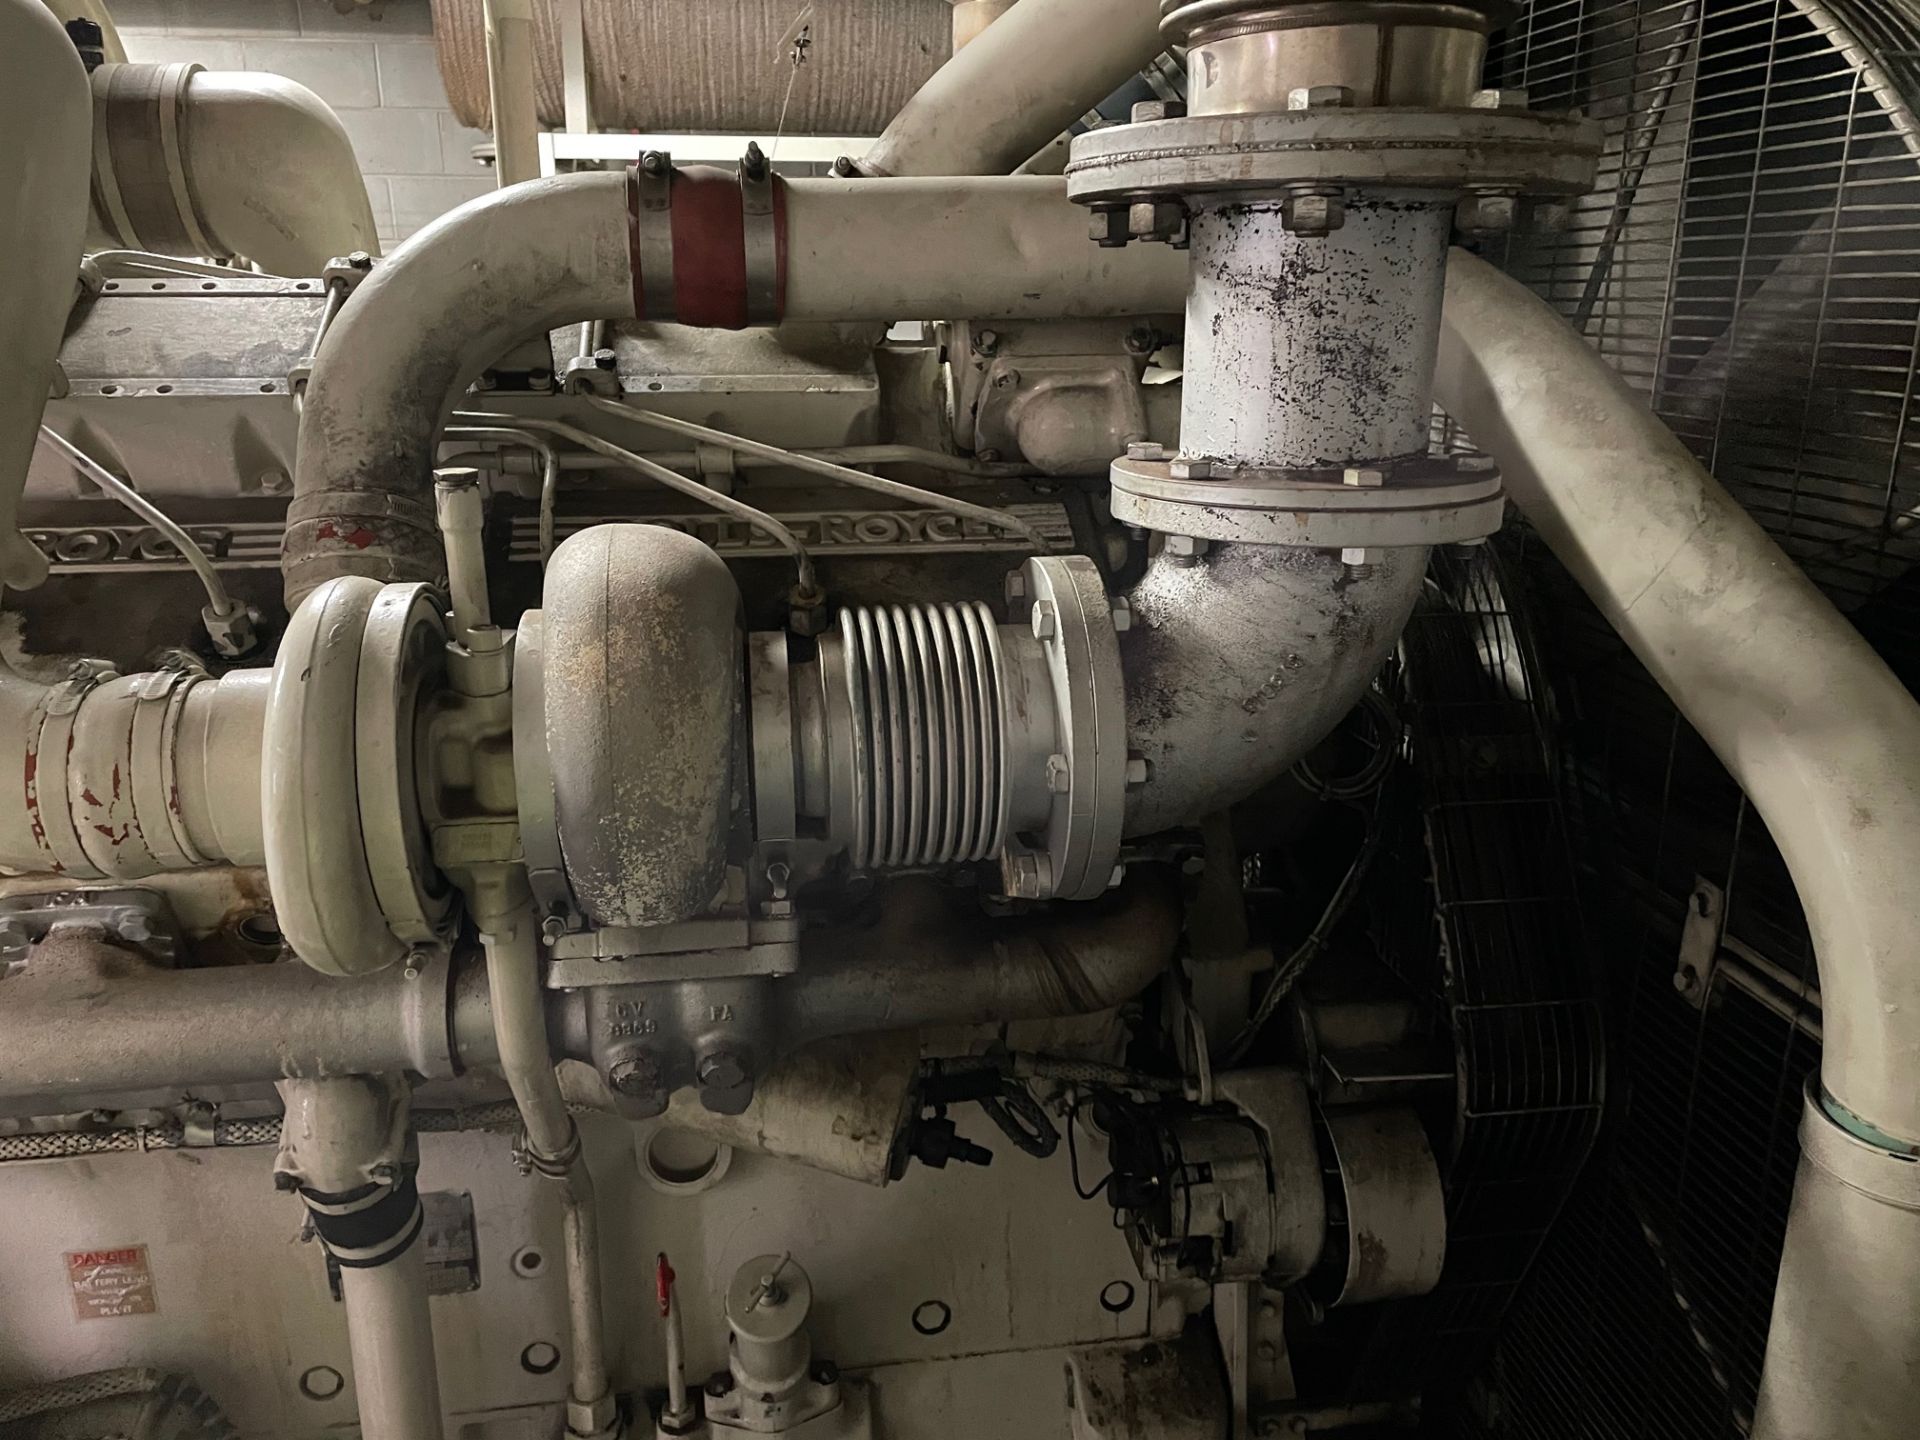 Dorman Dale - 600 kw generator, Plant No. 1877, with Rolls Royce engine type 12QT, no engine - Image 5 of 7